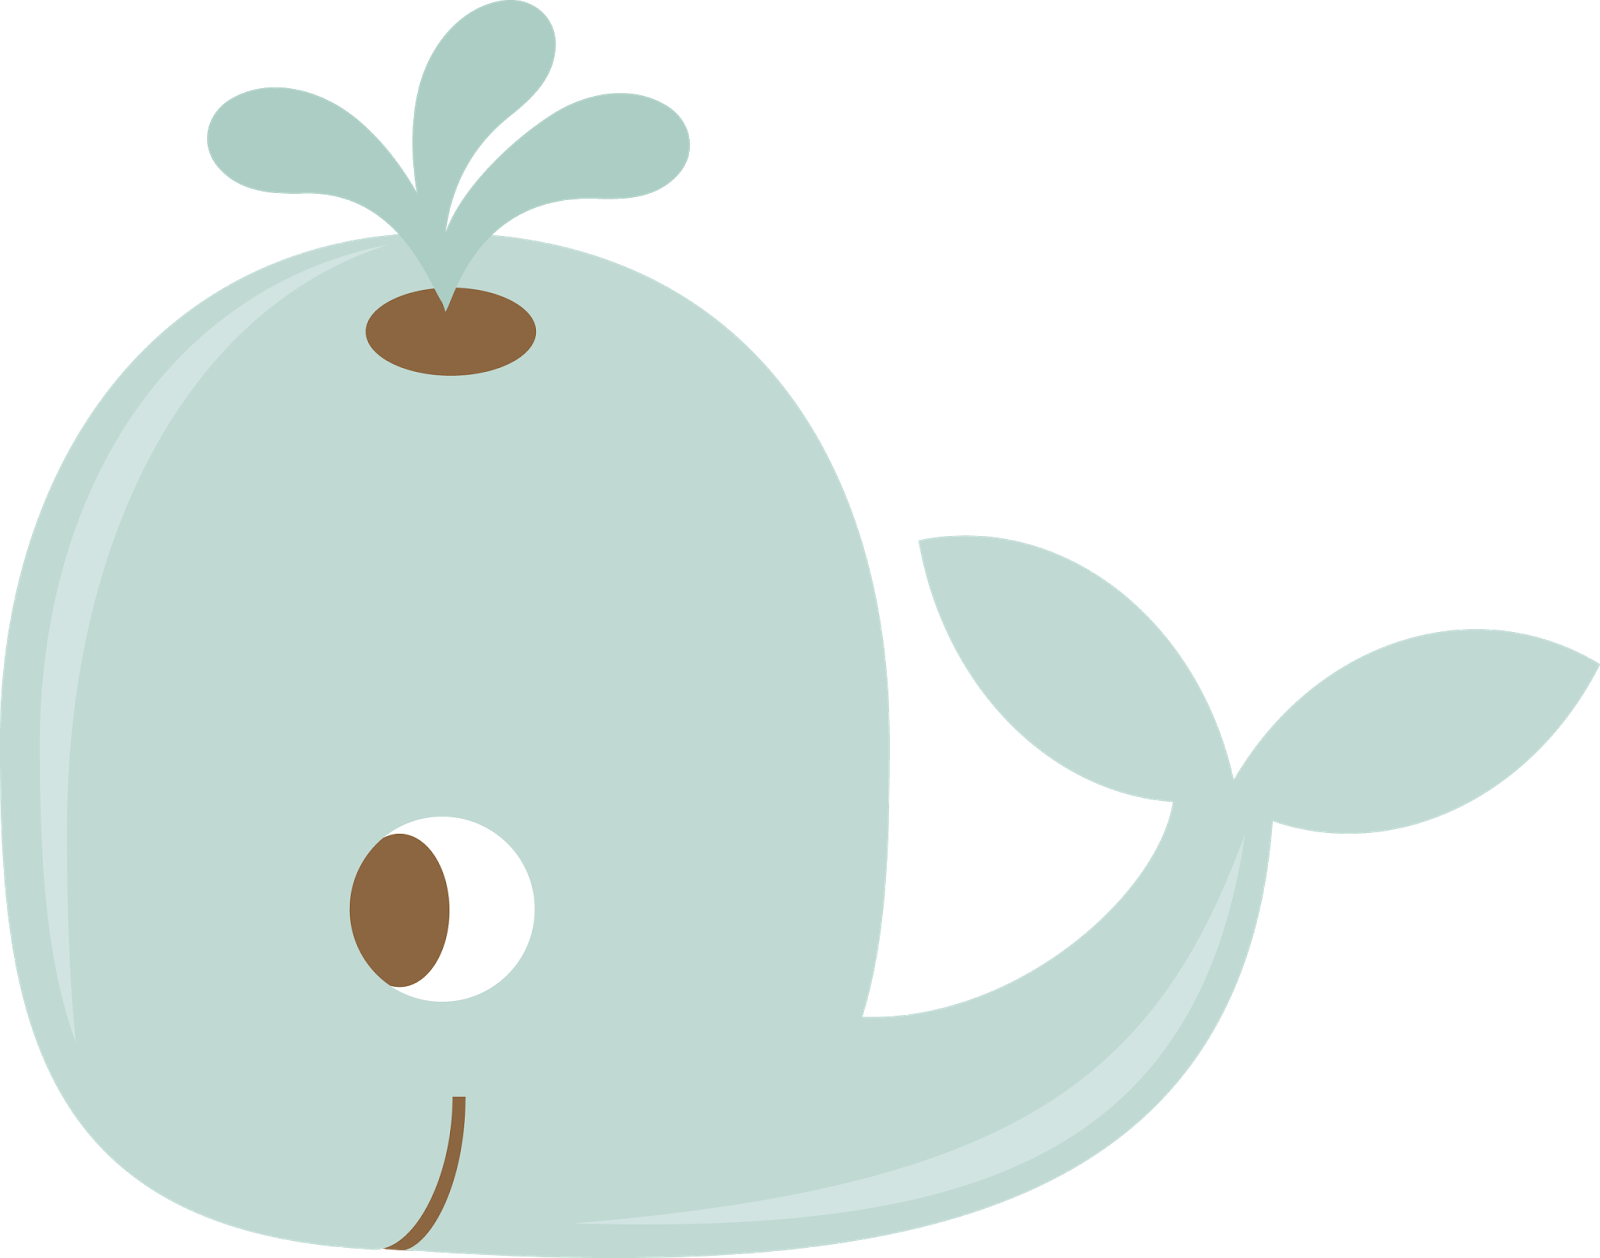 Cute Whale 1600*1258 Transprent Png Free Download - Cute Whale 1600*1258 Transprent Png Free Download (1600x1258)